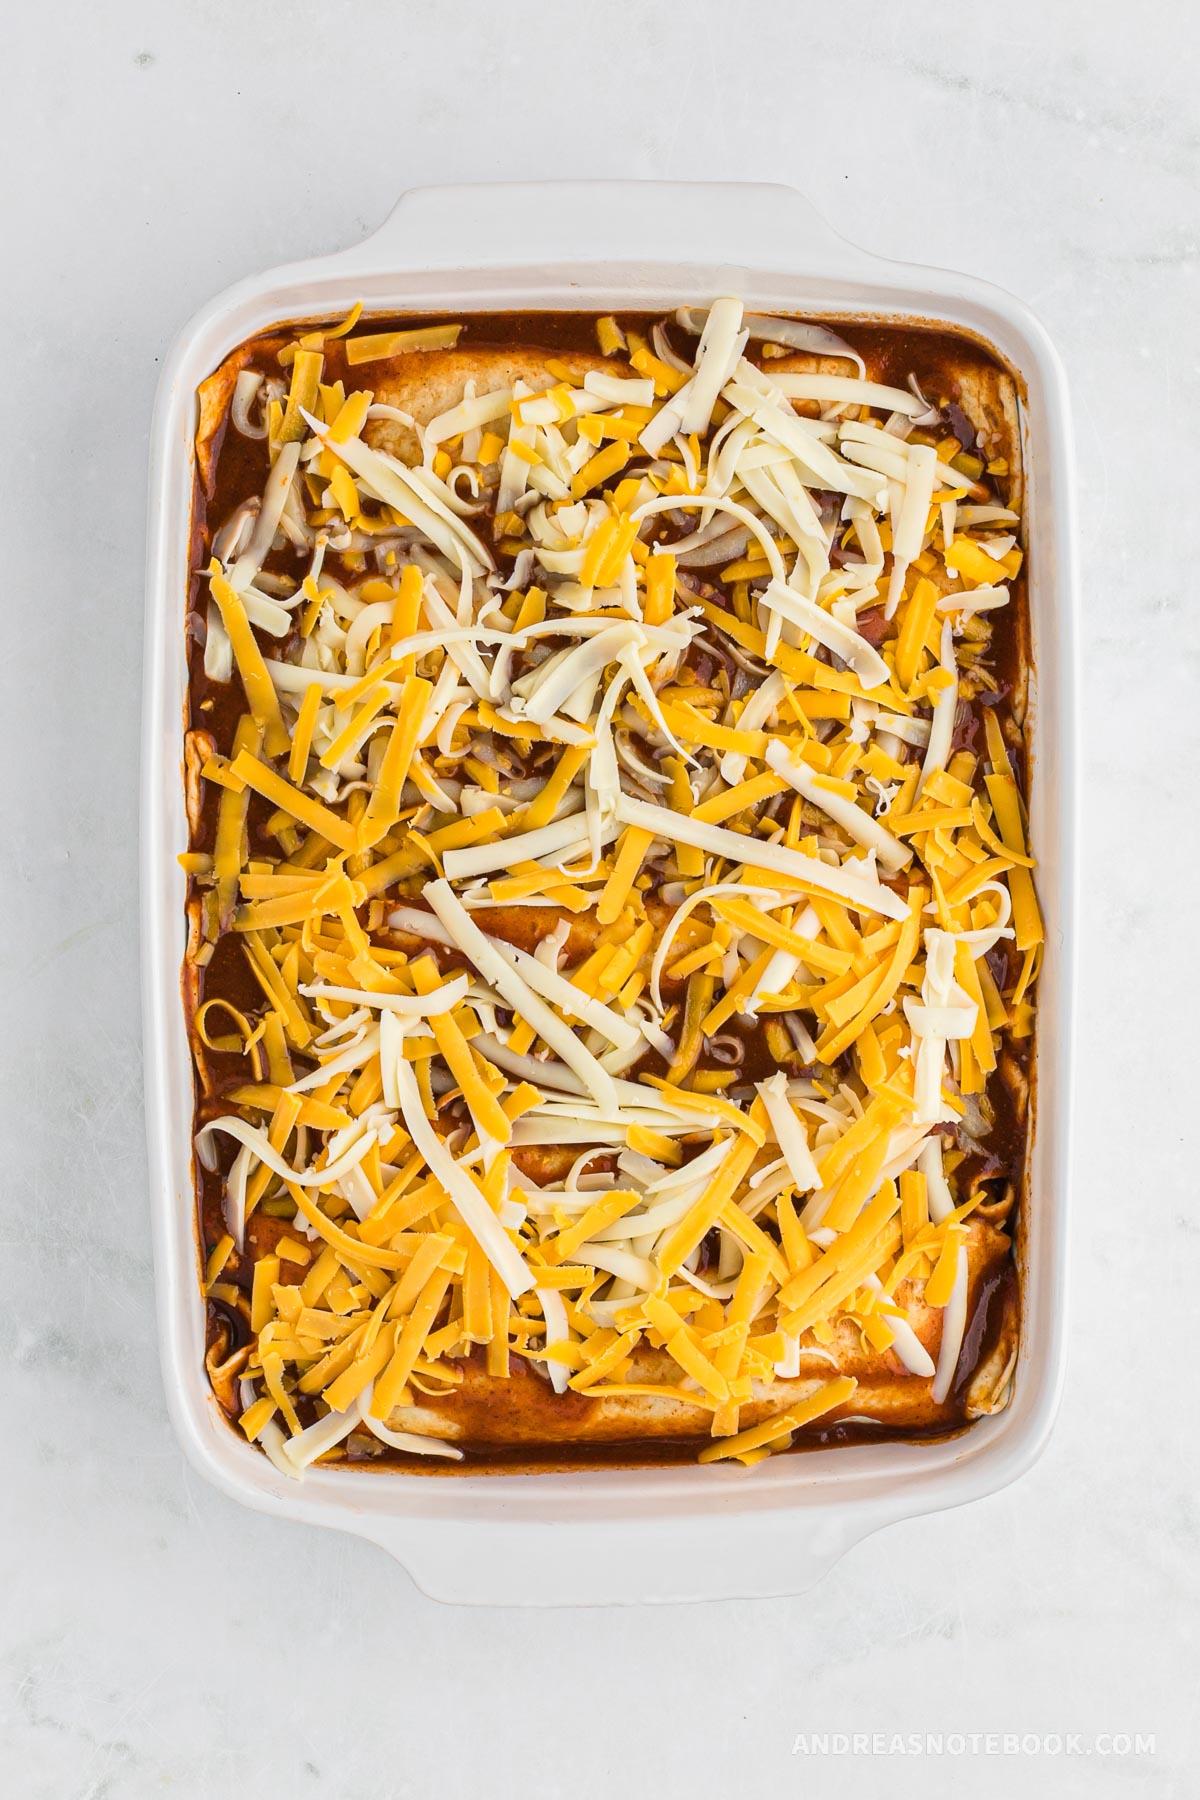 Enchiladas rolled up and placed into a pan. Uncooked shredded cheese on top.